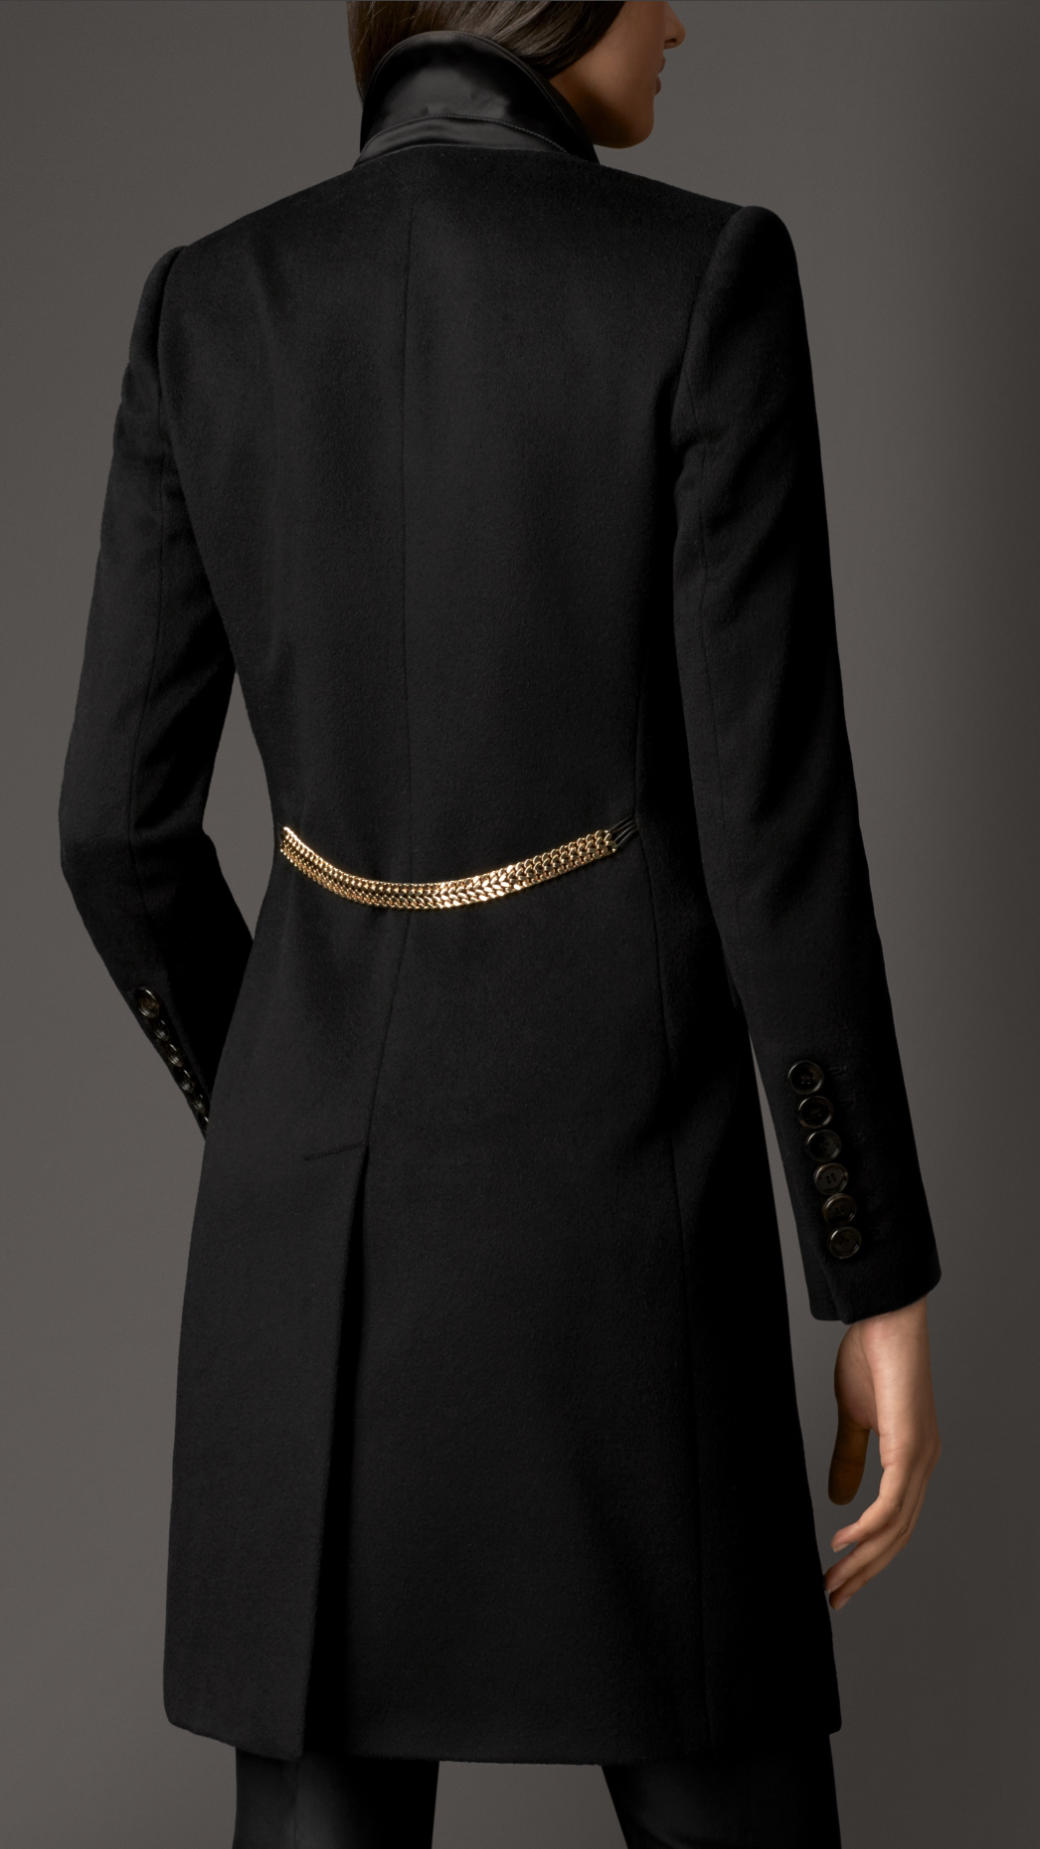 Billy ged Overveje slump Burberry Chain Detail Cashmere Tuxedo Coat in Black | Lyst